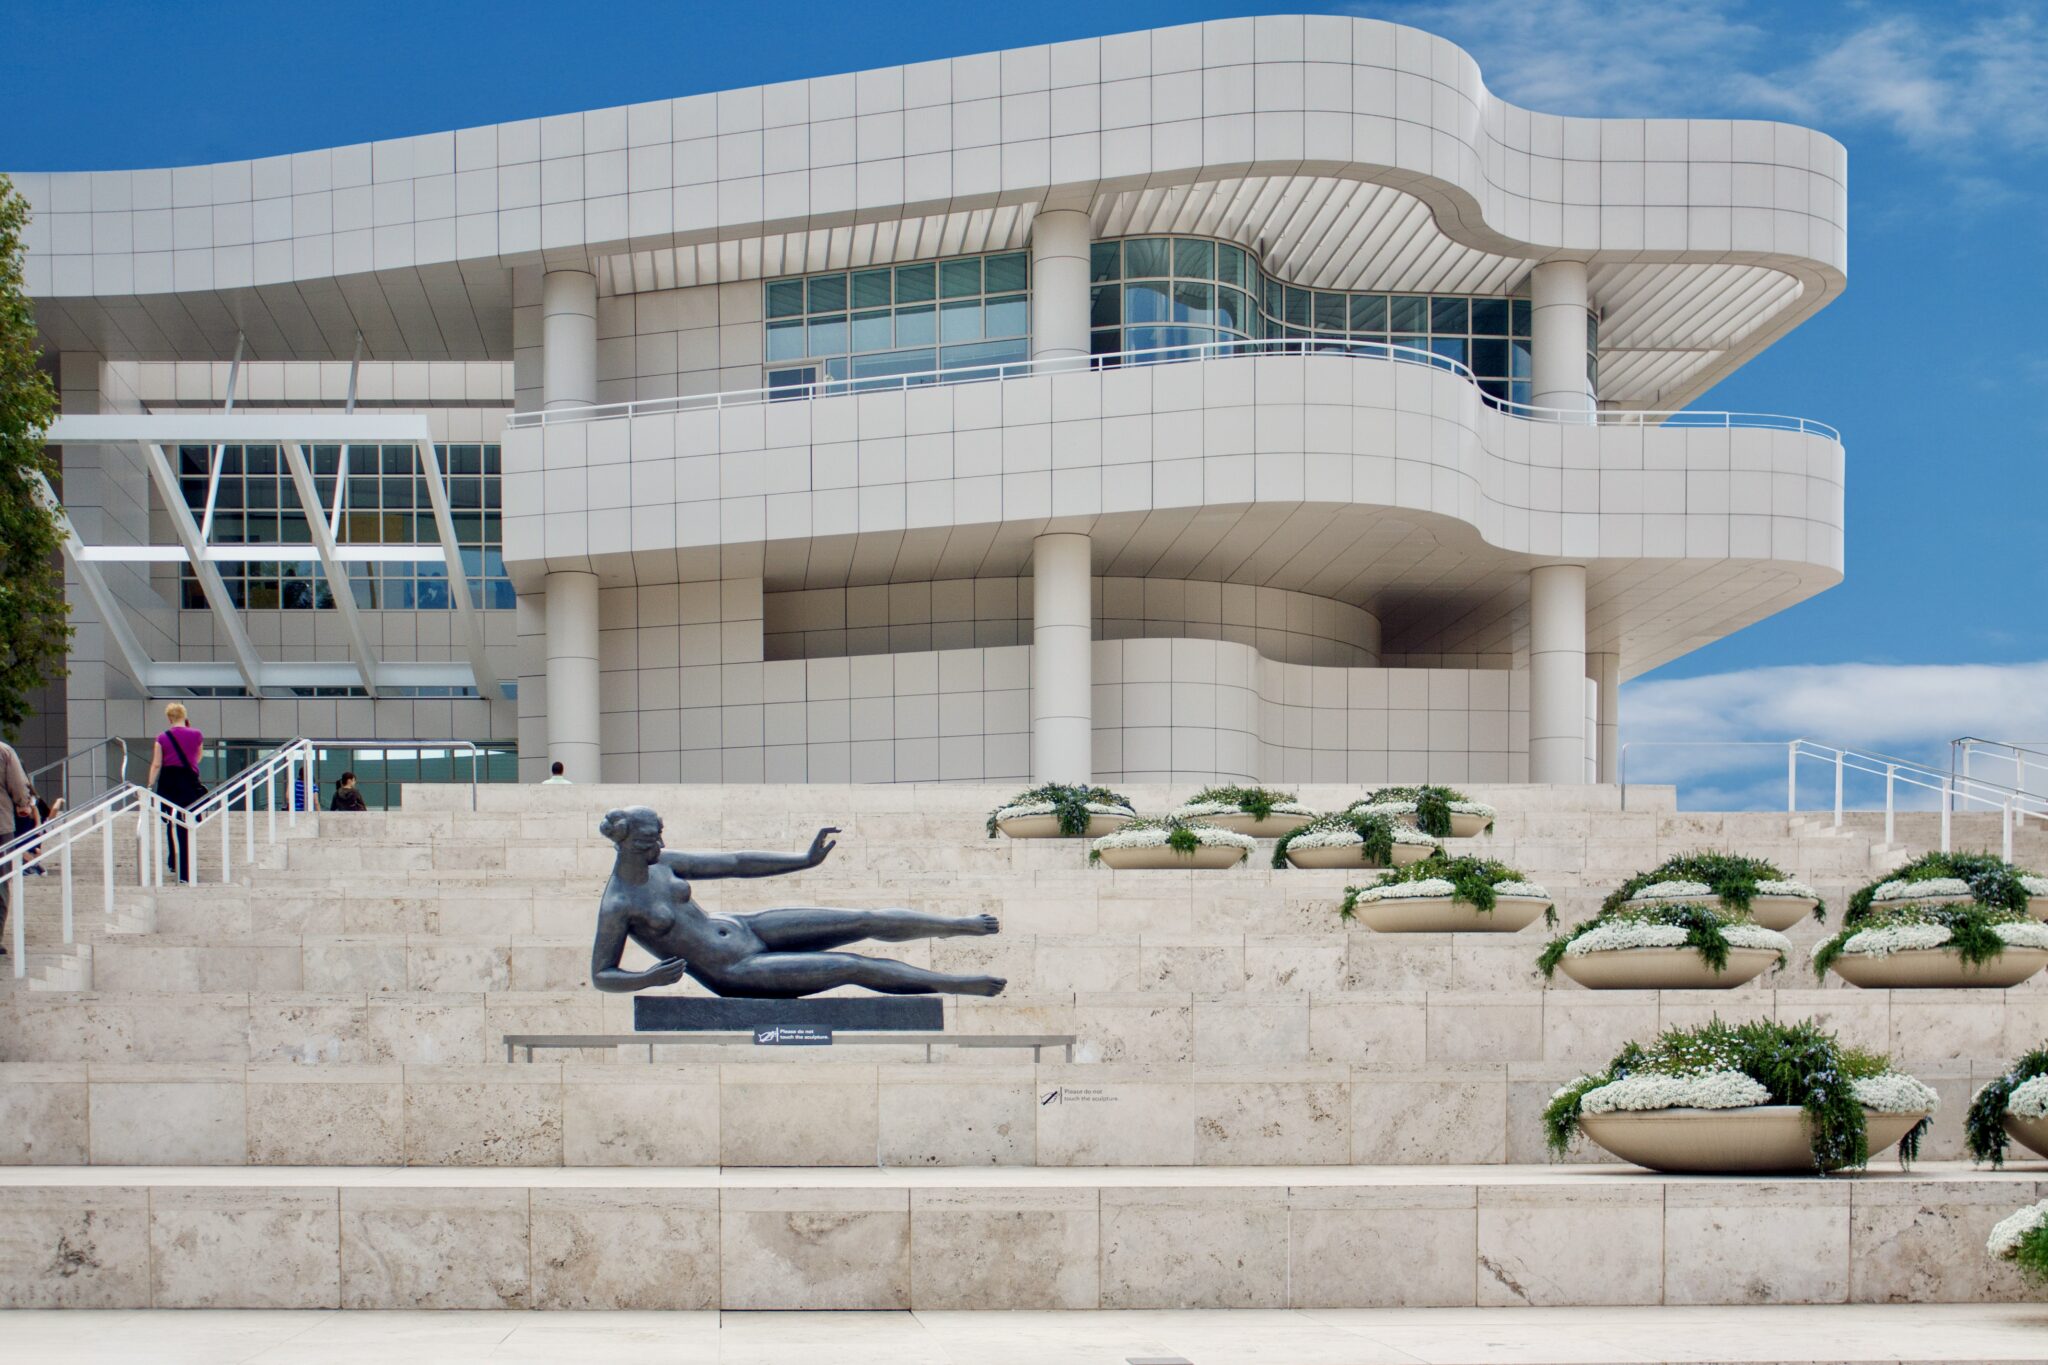 Guide To The Getty Center In Los Angeles What To See Tips The Geographical Cure